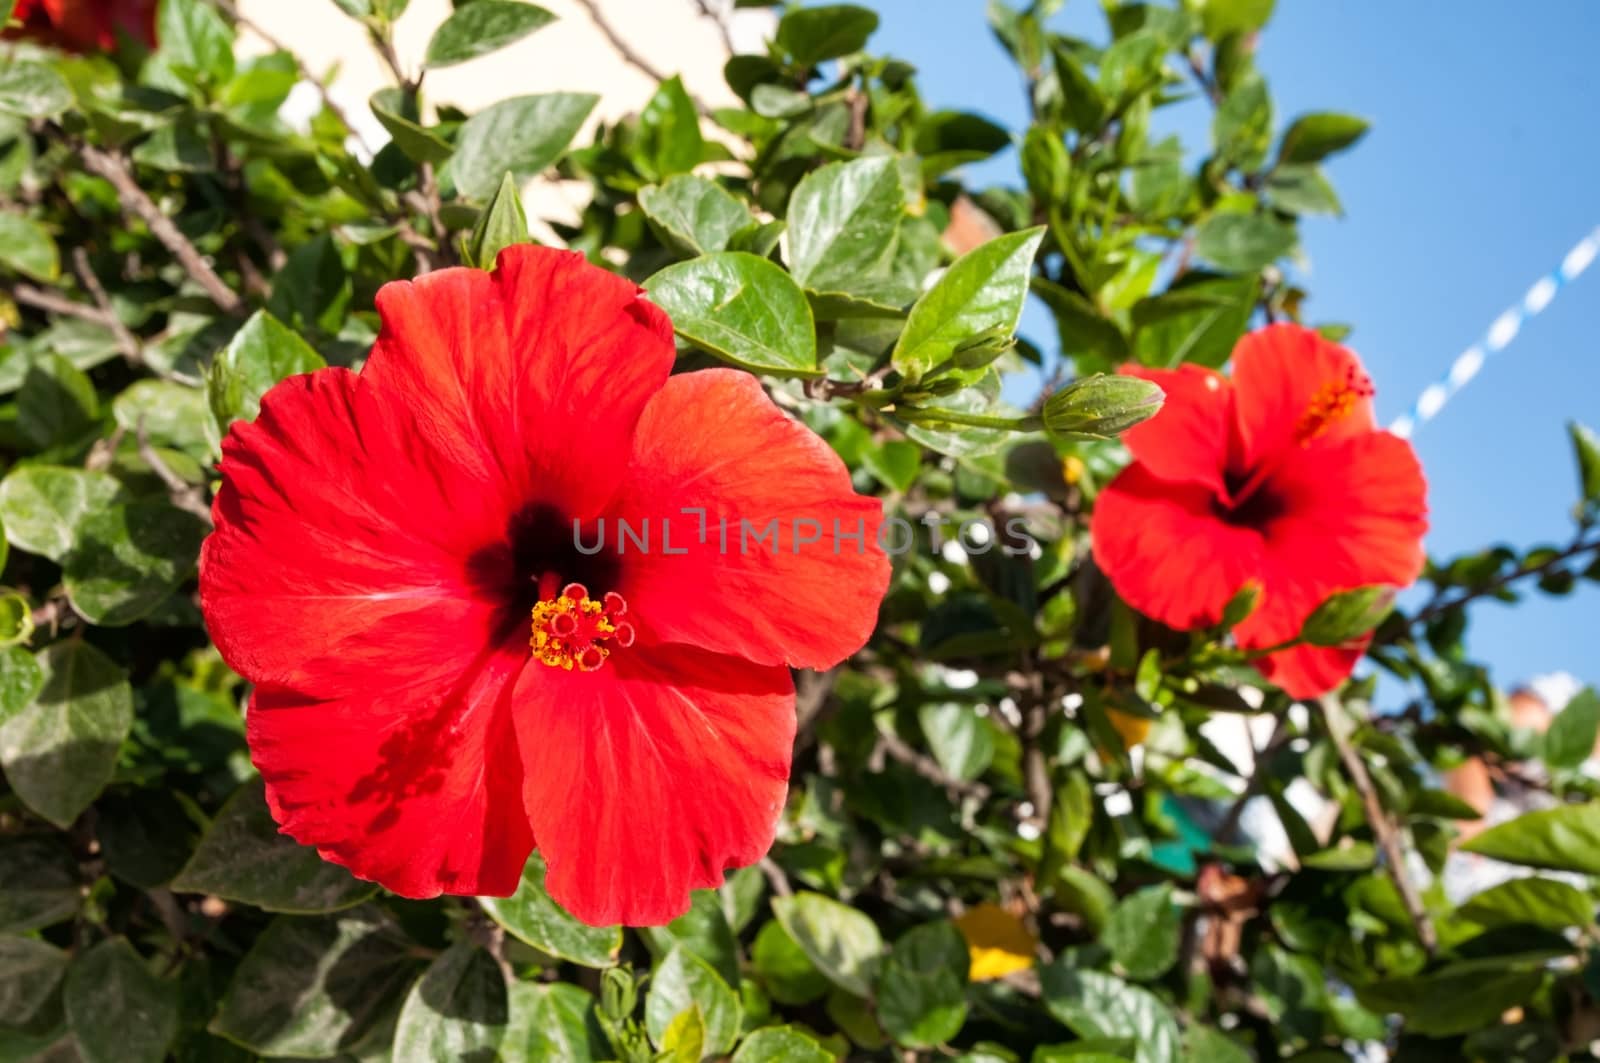 Hibiscus is a symbol of the Mediterranean